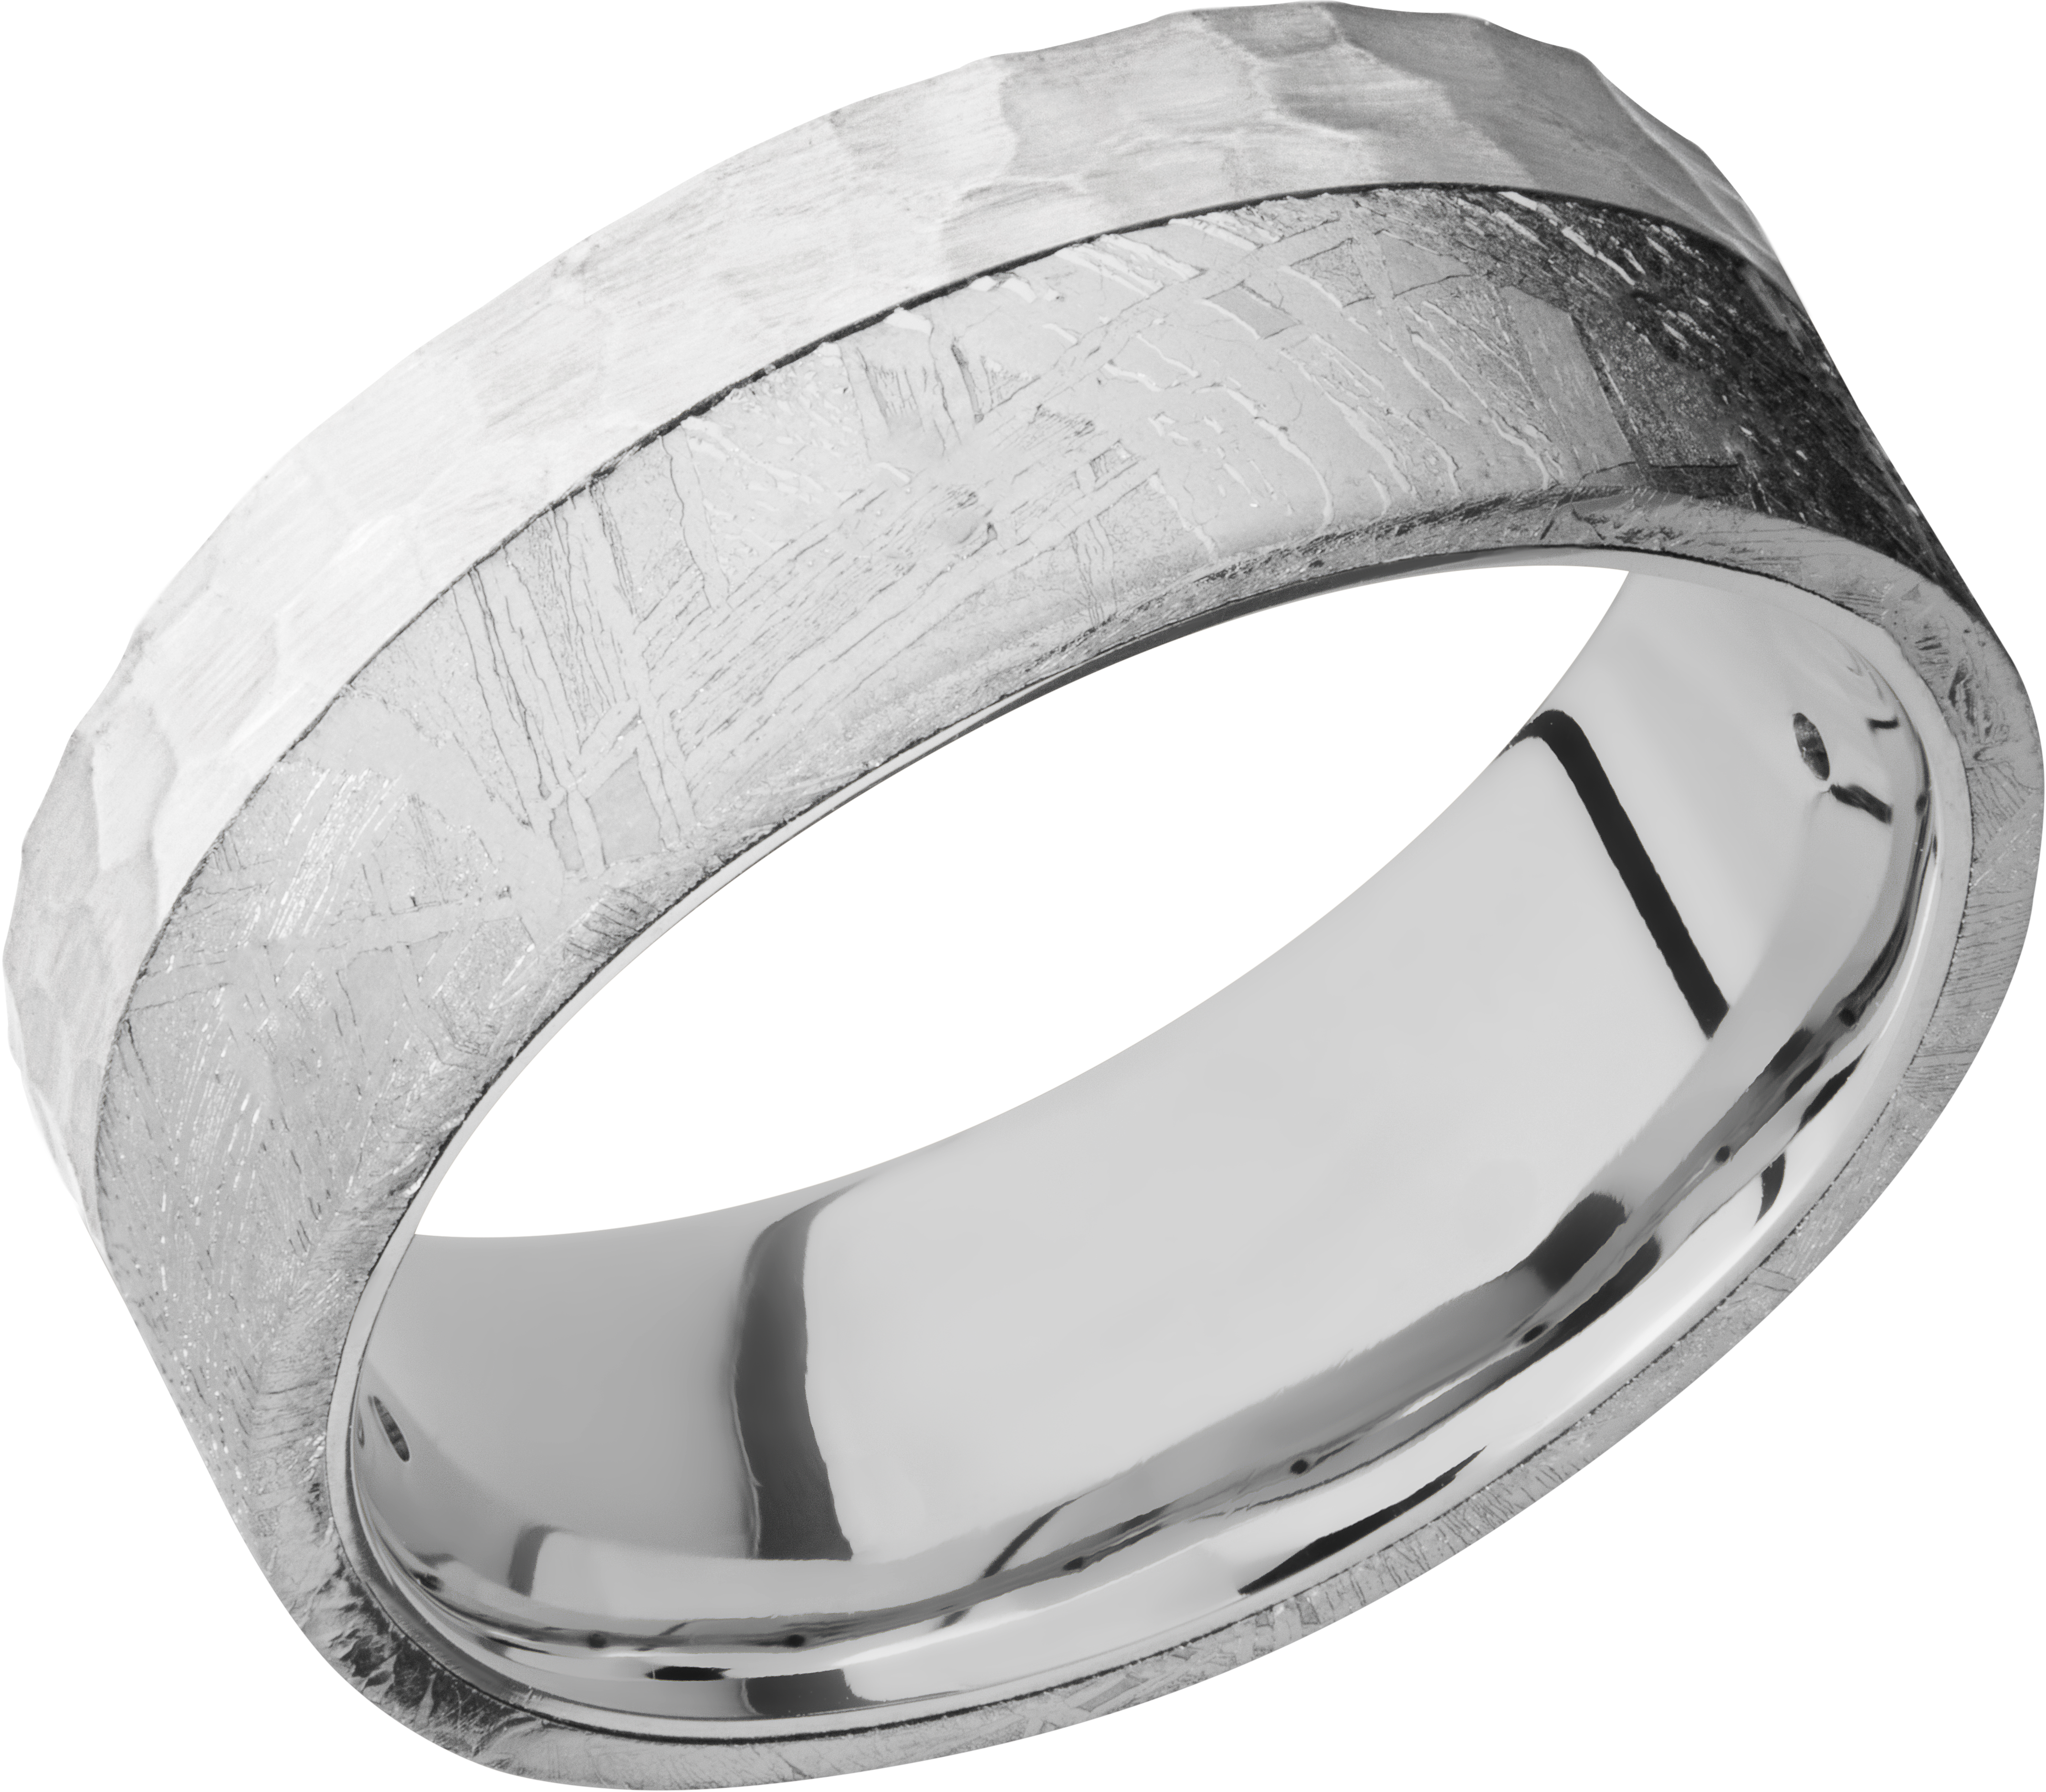 Cobalt chrome 7mm flat band with grooved edges with one inlay that is 5mm wide set in the center of